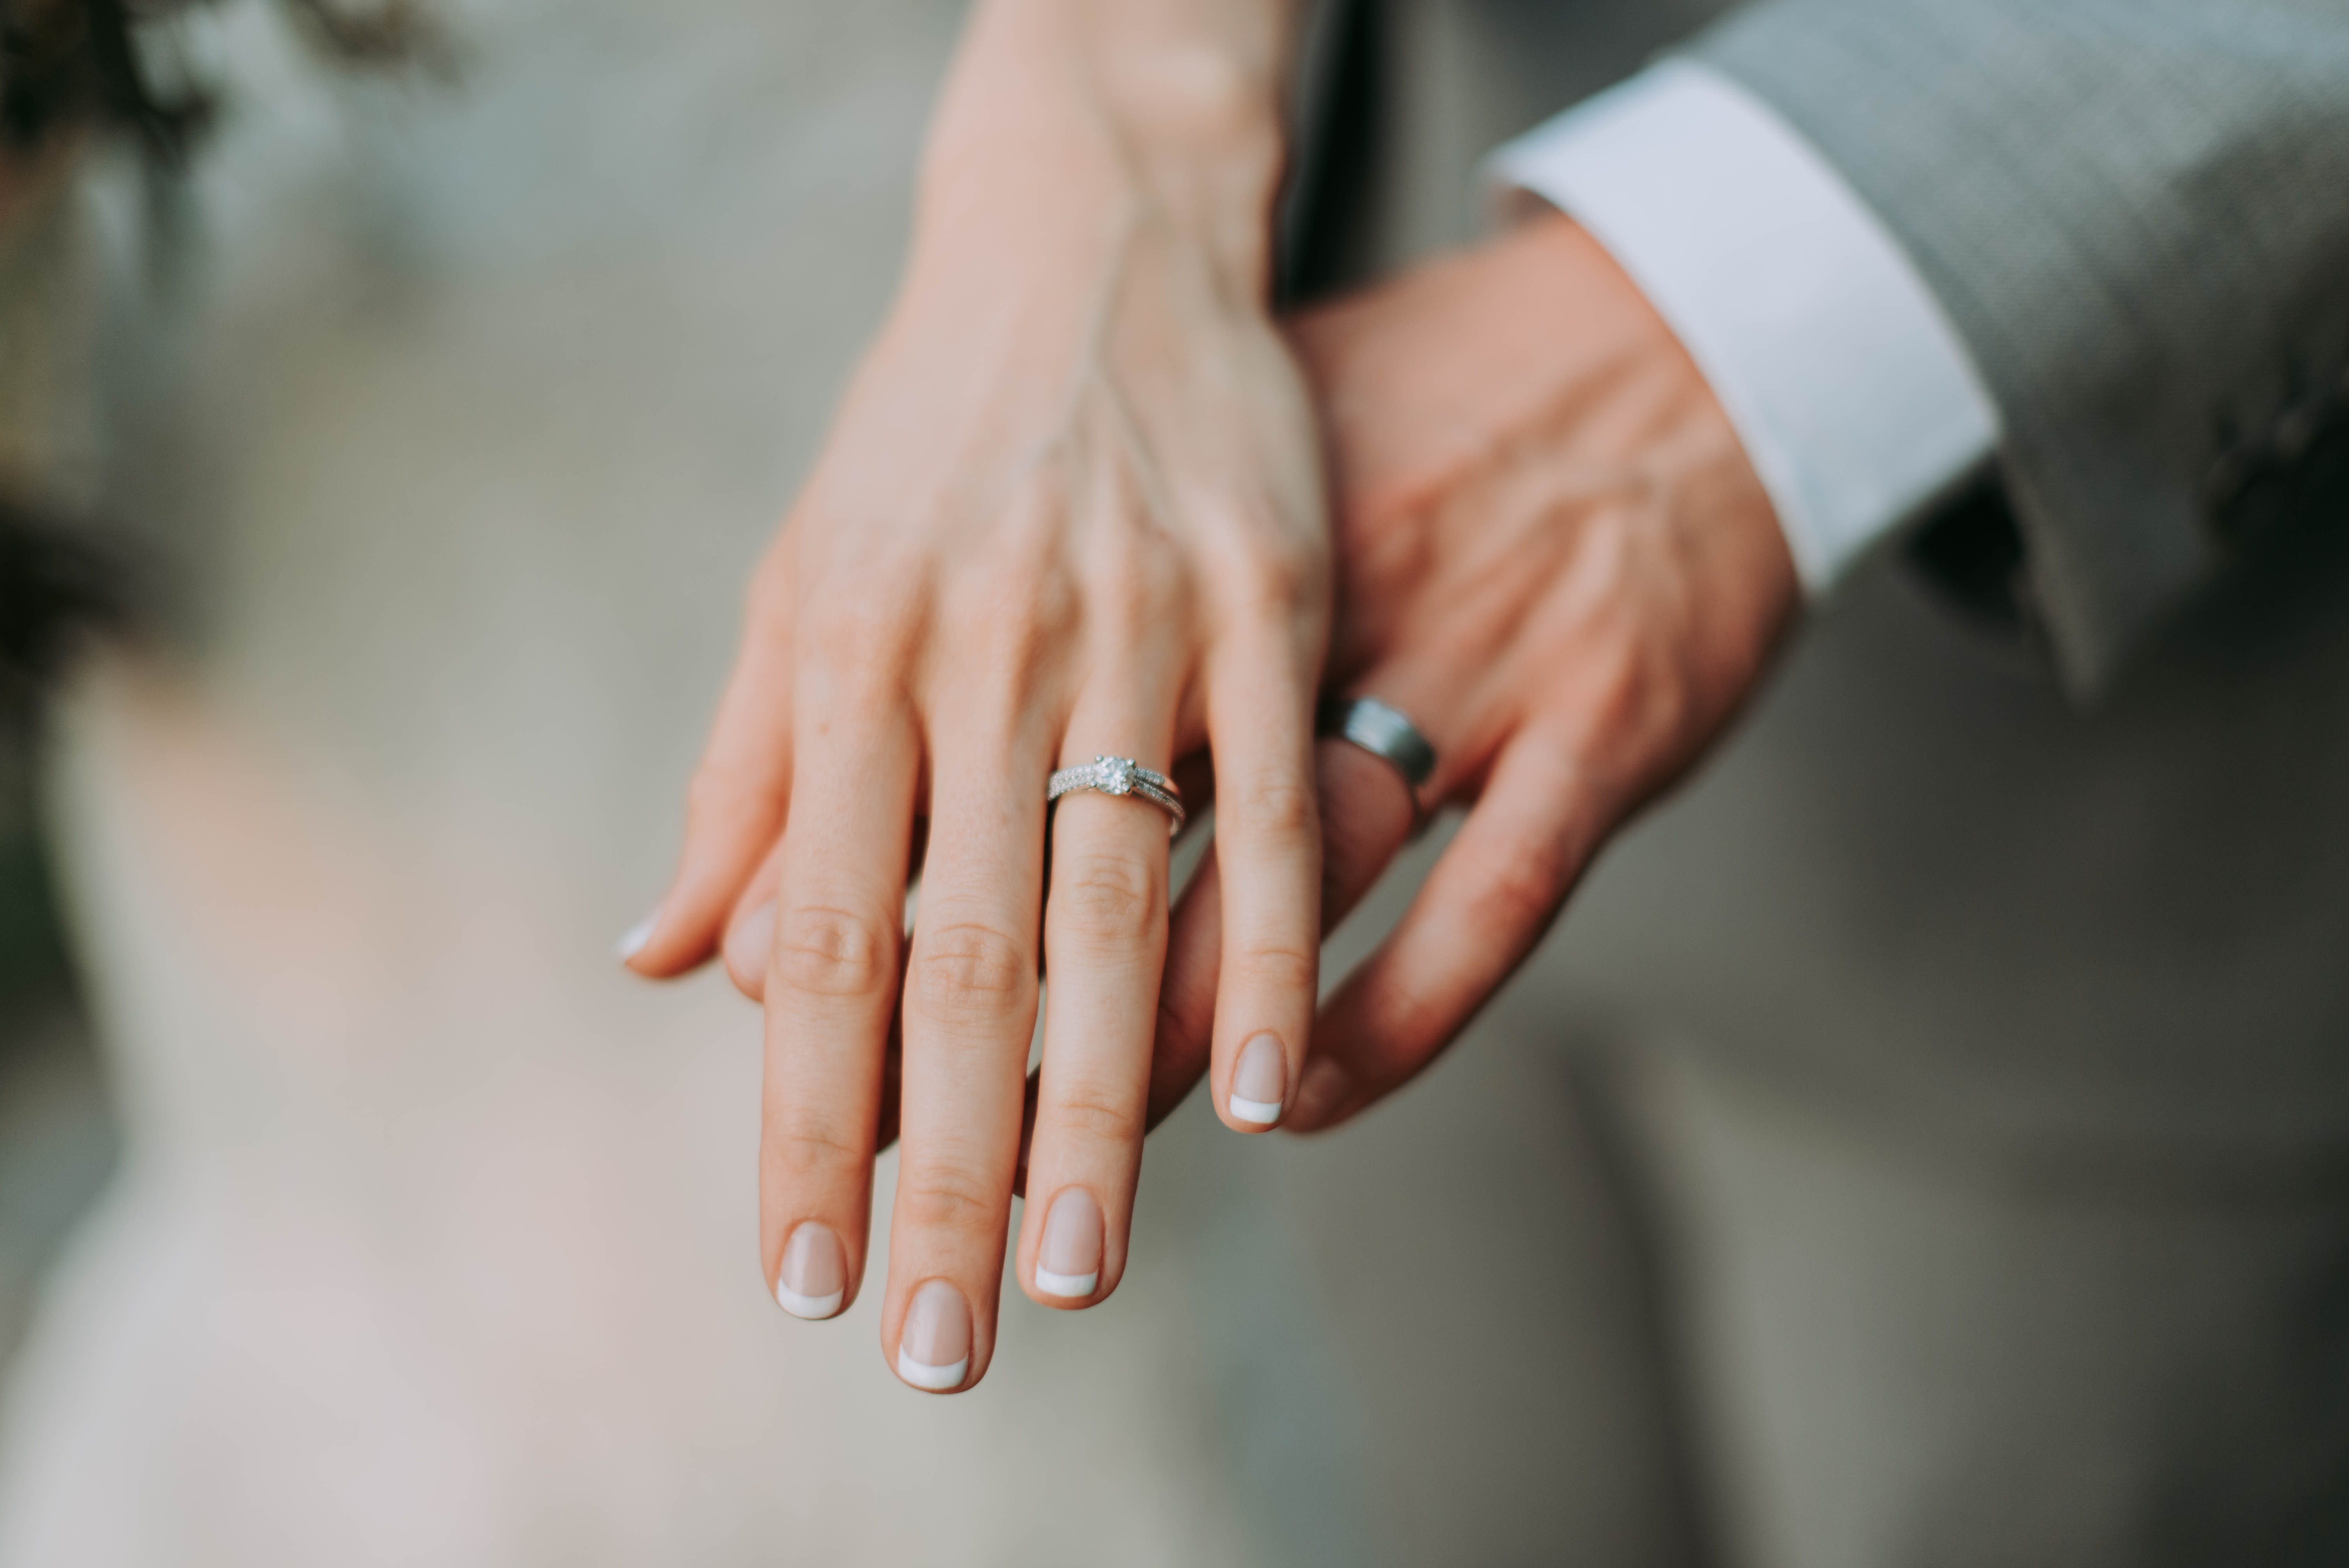 4 Financial Benefits of Marriage